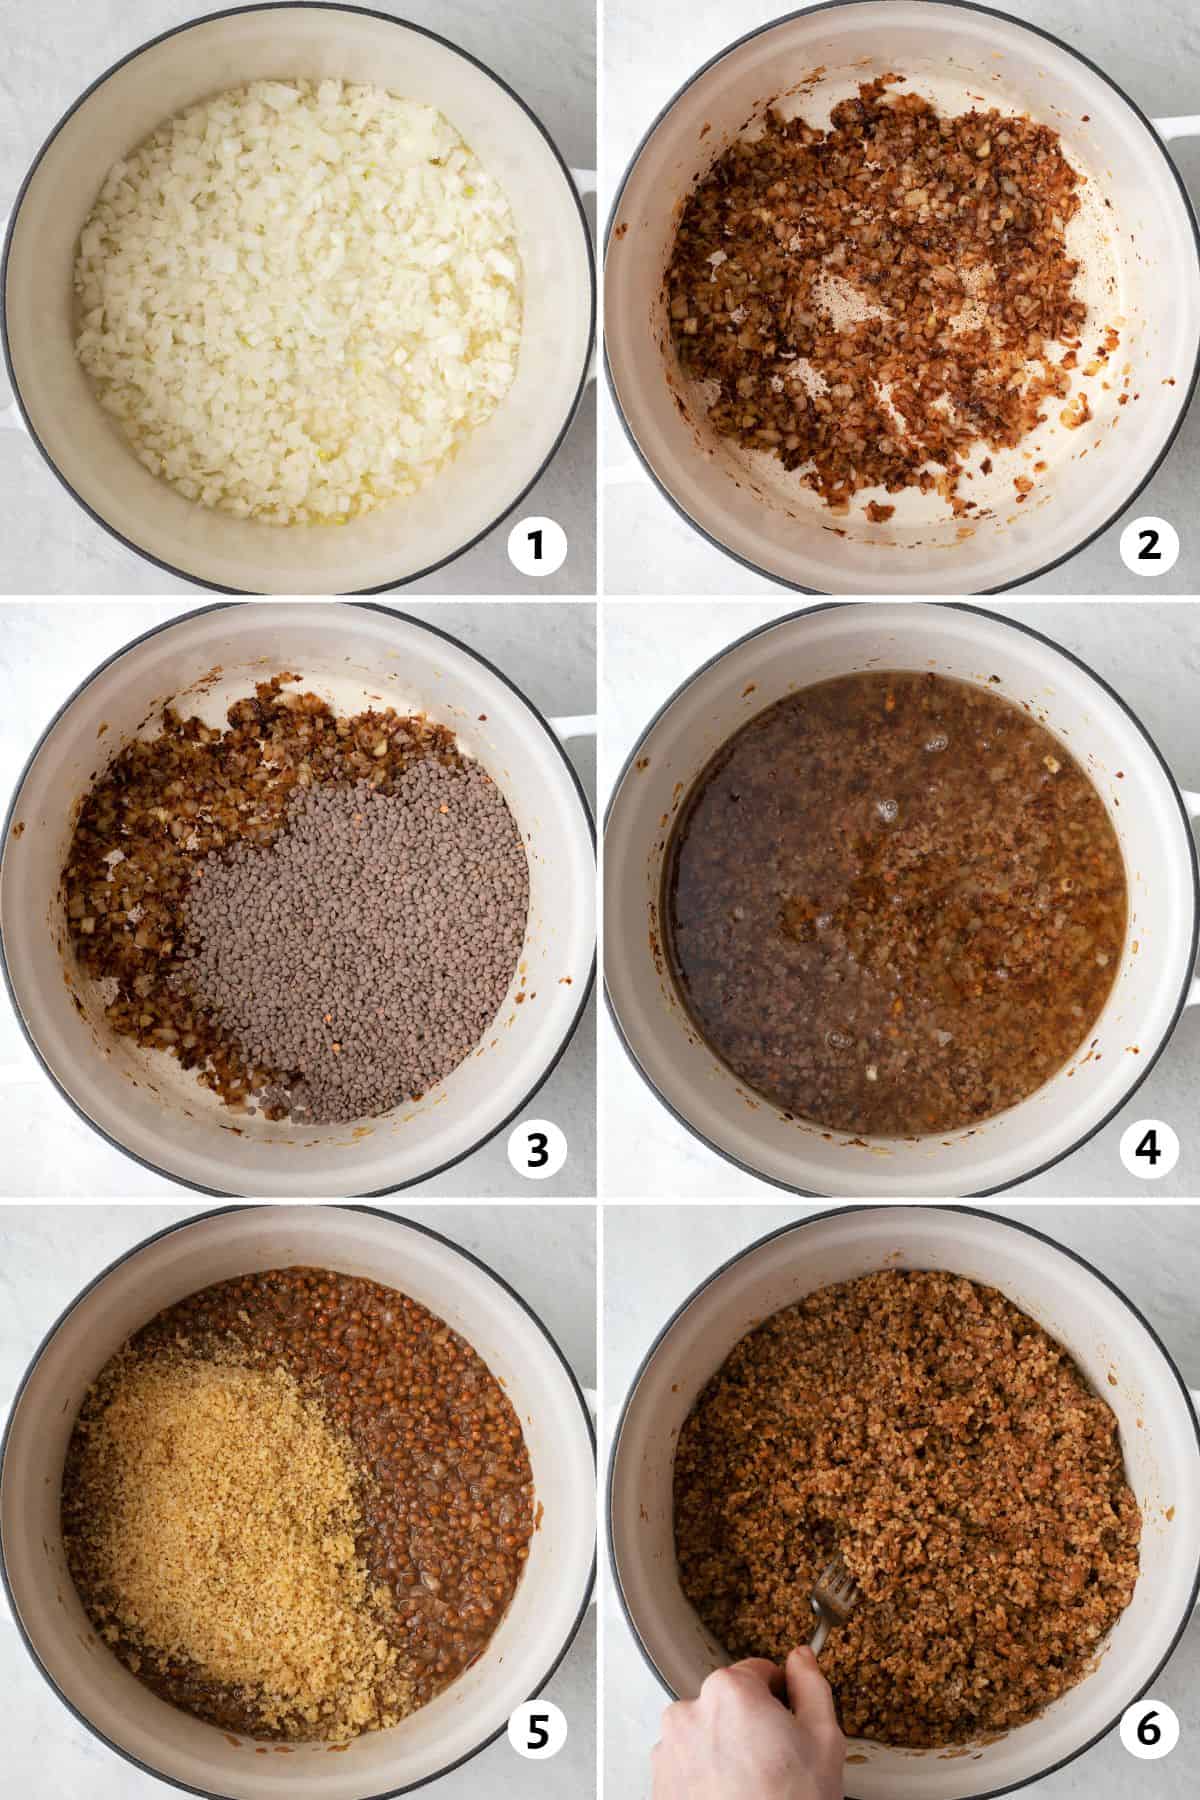 6 image collage making recipe in one pot: 1-diced onions in a pot, 2- onions after deeply caramelized, 3-lentils added before combing with onions, 4- water added to pot, 5- after cooking lentils with bulgur added before combined, 6- after fully cooked with a fork fluffing the mixture and cumin sprinkled on top.